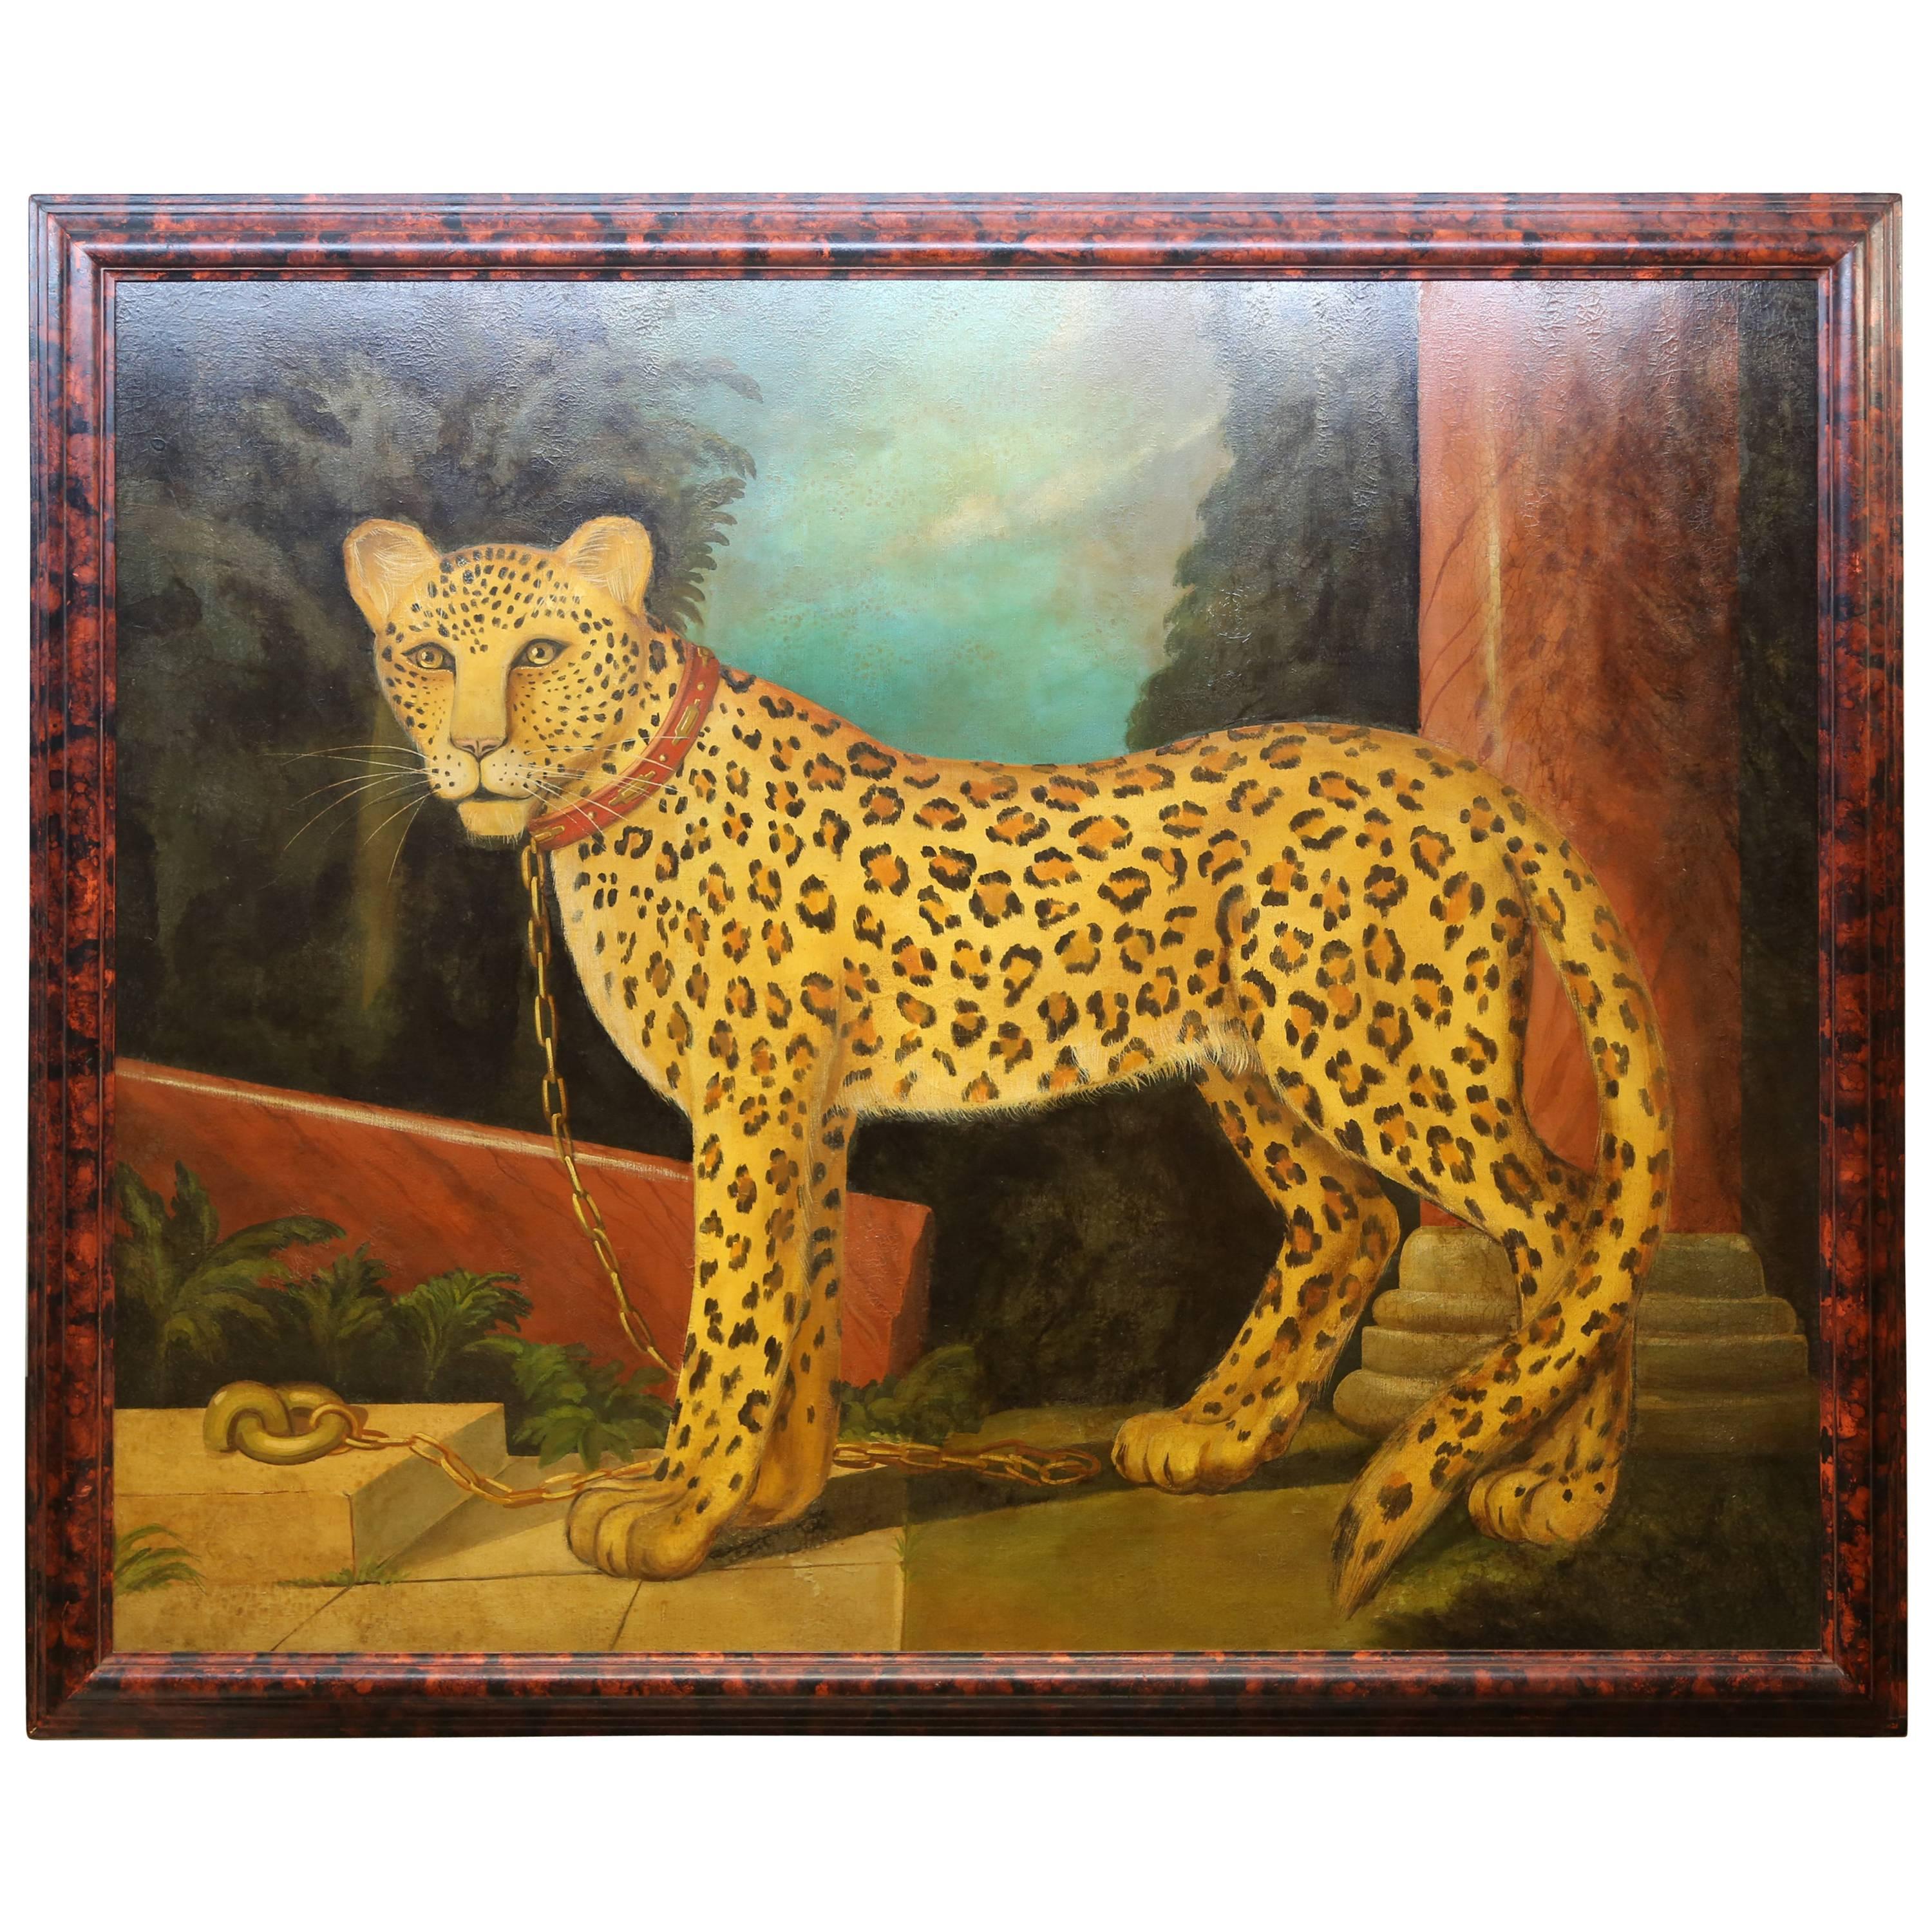 Grand Scale Painting of Leopard by Wm.Skilling